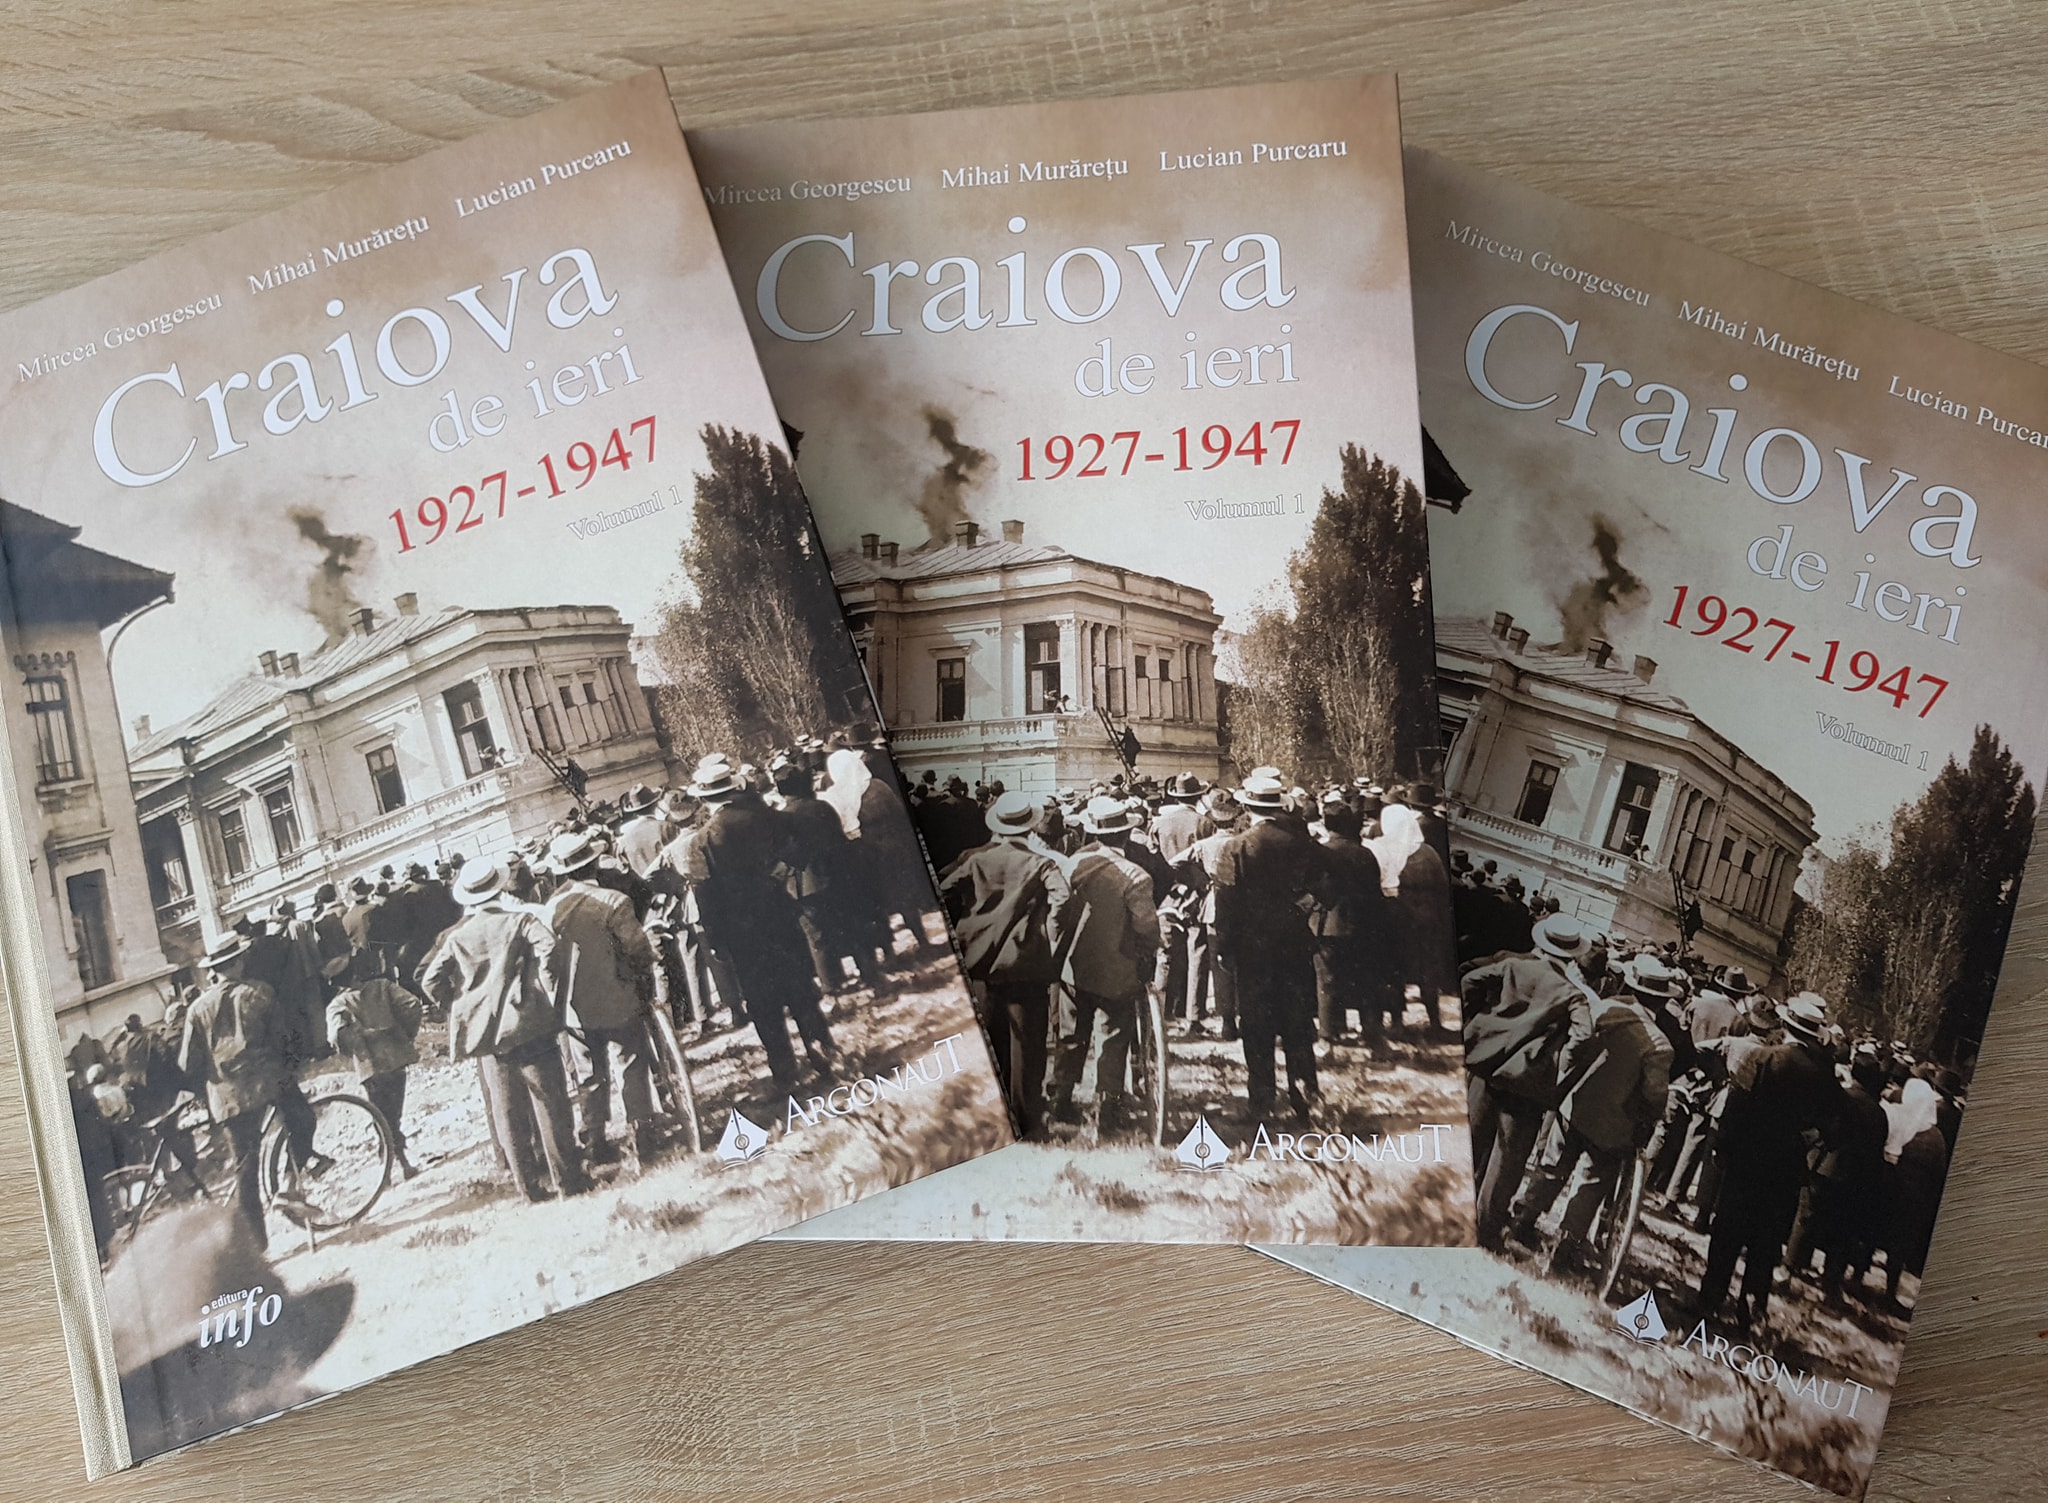 MustHave: "Craiova of yesterday 1927-1947", a sensational piece of history of the capital of Dolj